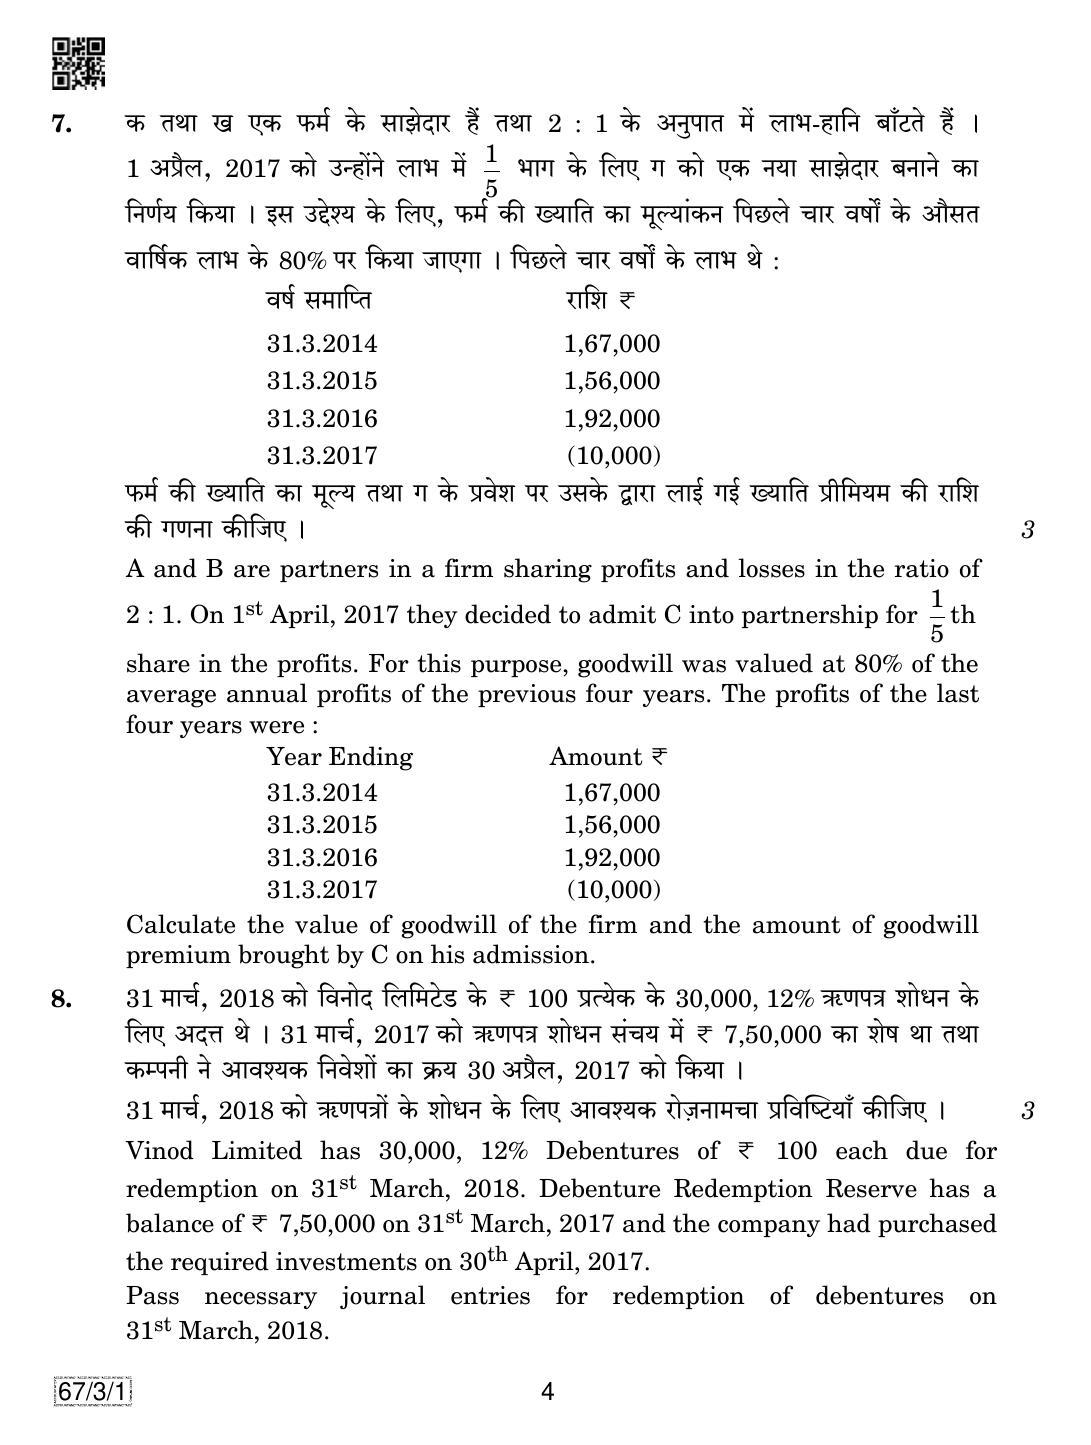 CBSE Class 12 67-3-1 Accountancy 2019 Question Paper - Page 4